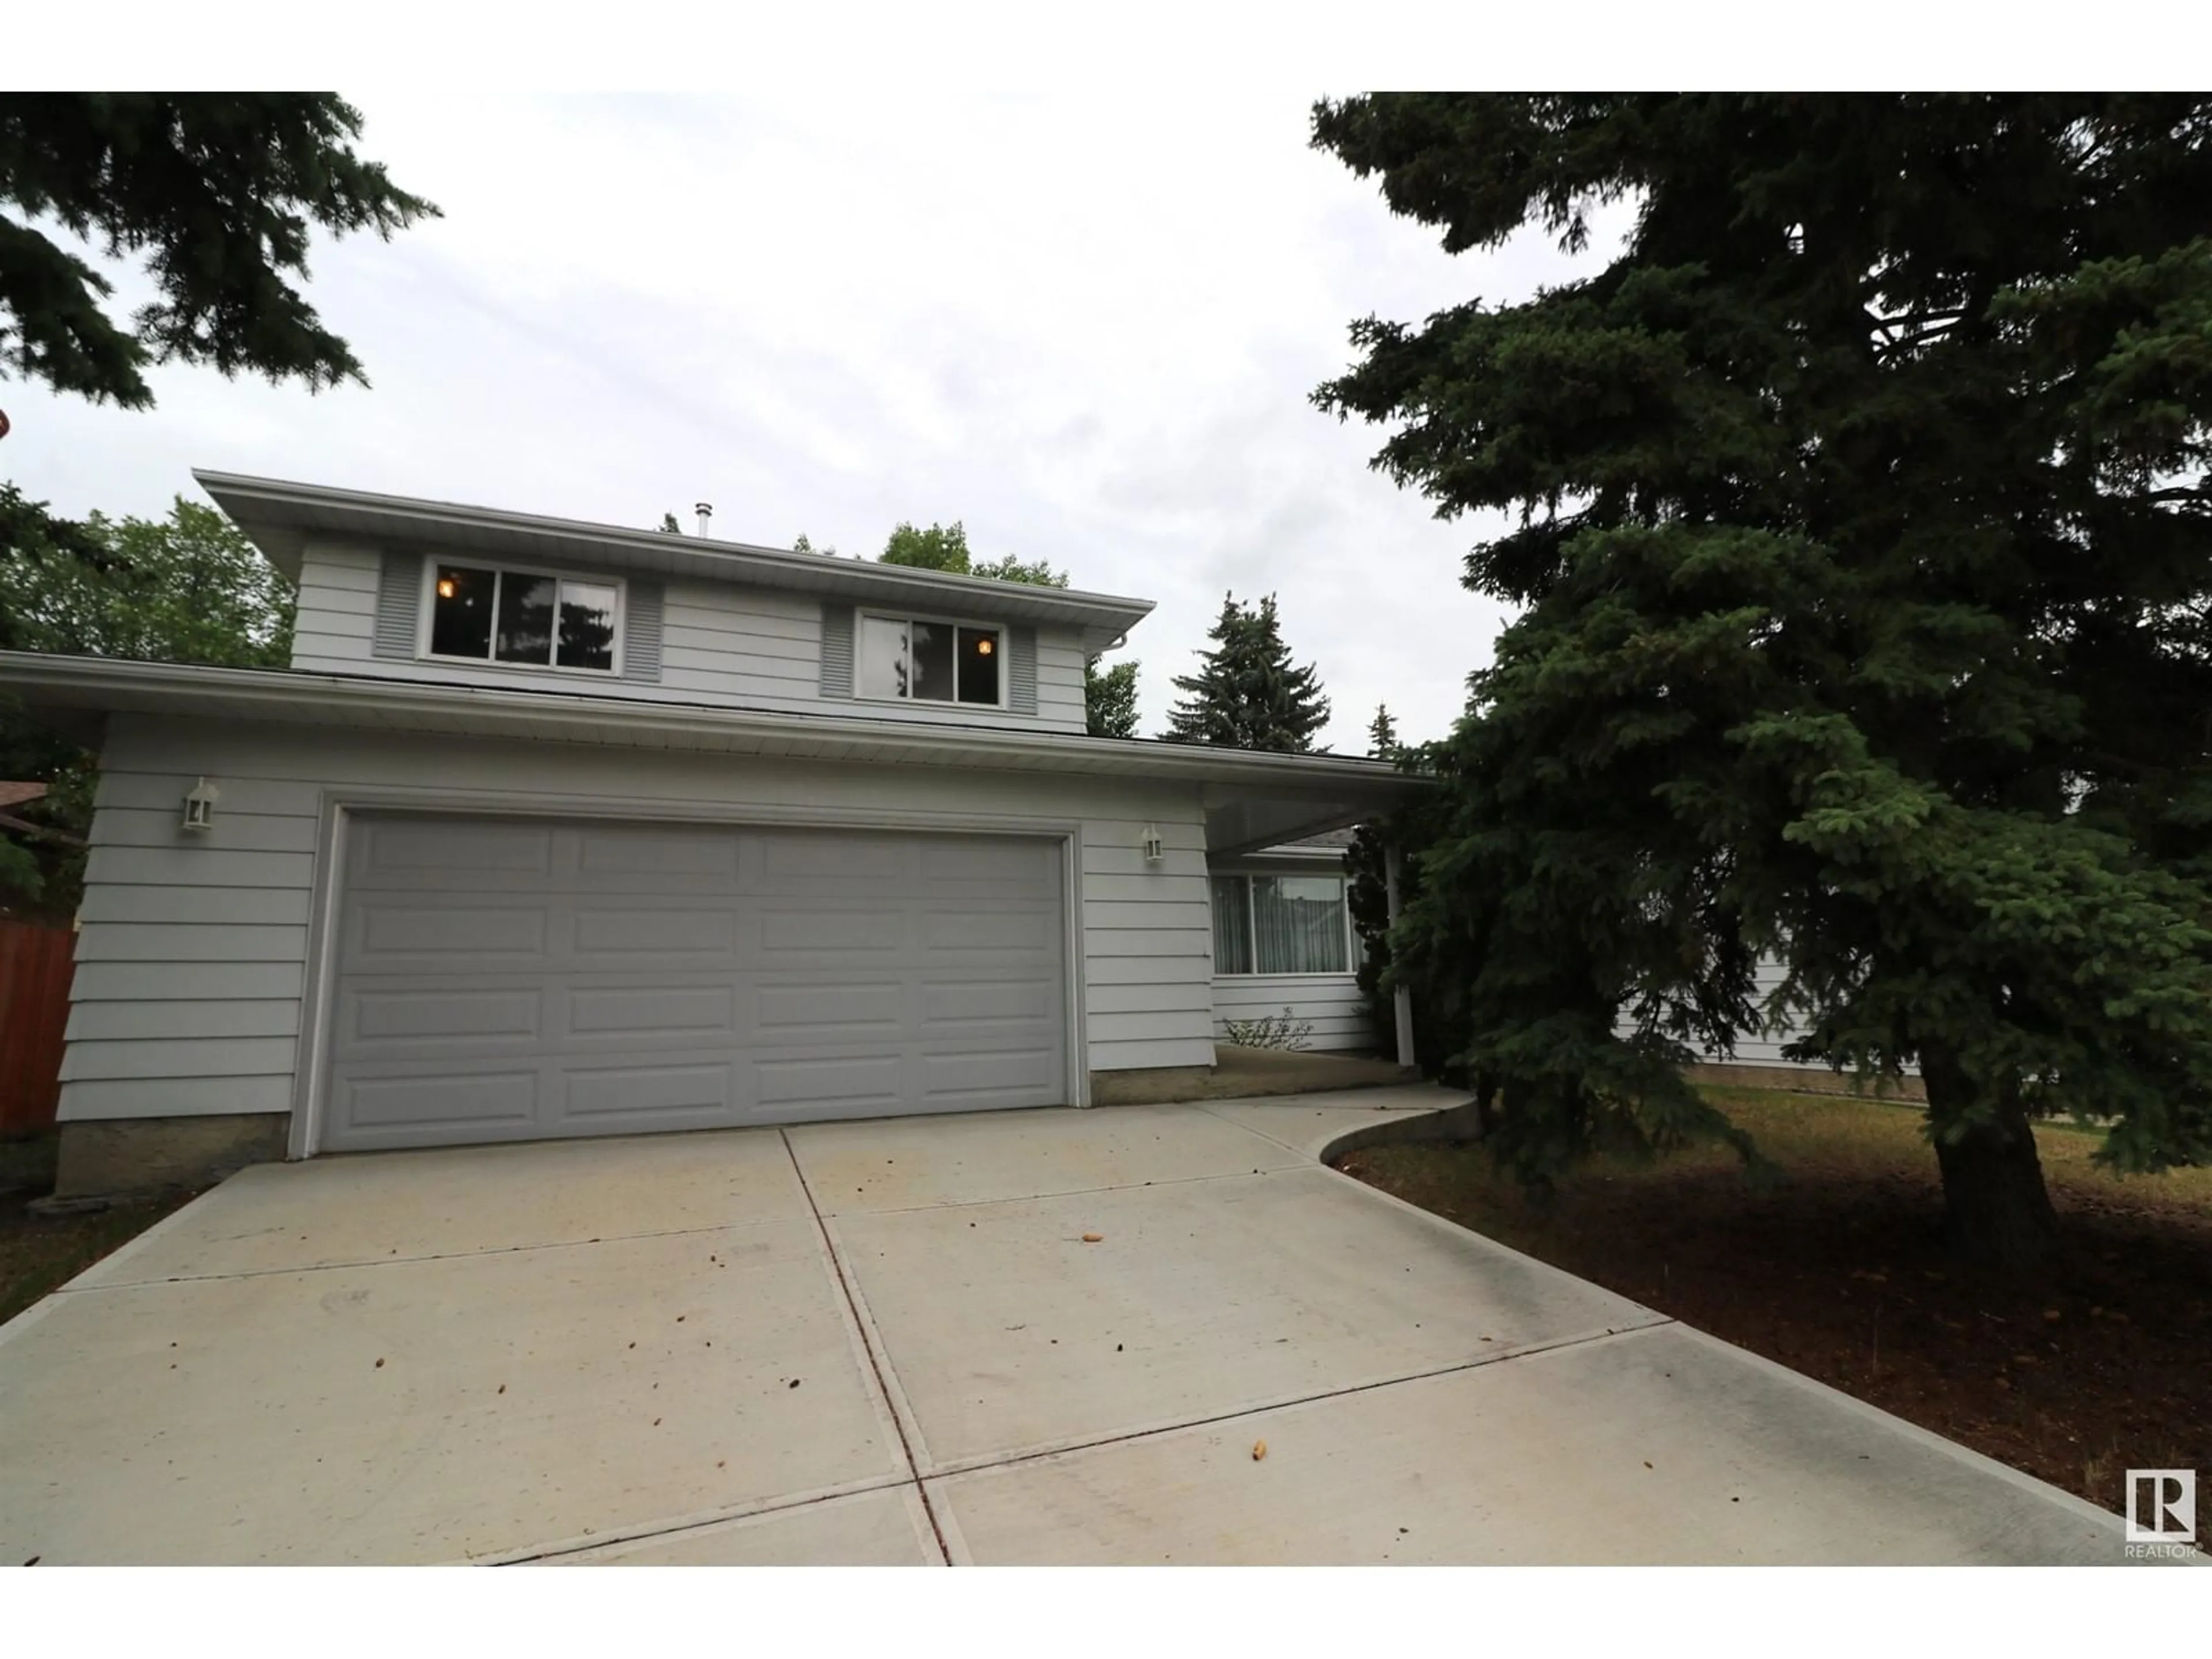 A pic from exterior of the house or condo for 11330 33A AV NW, Edmonton Alberta T6J3T6